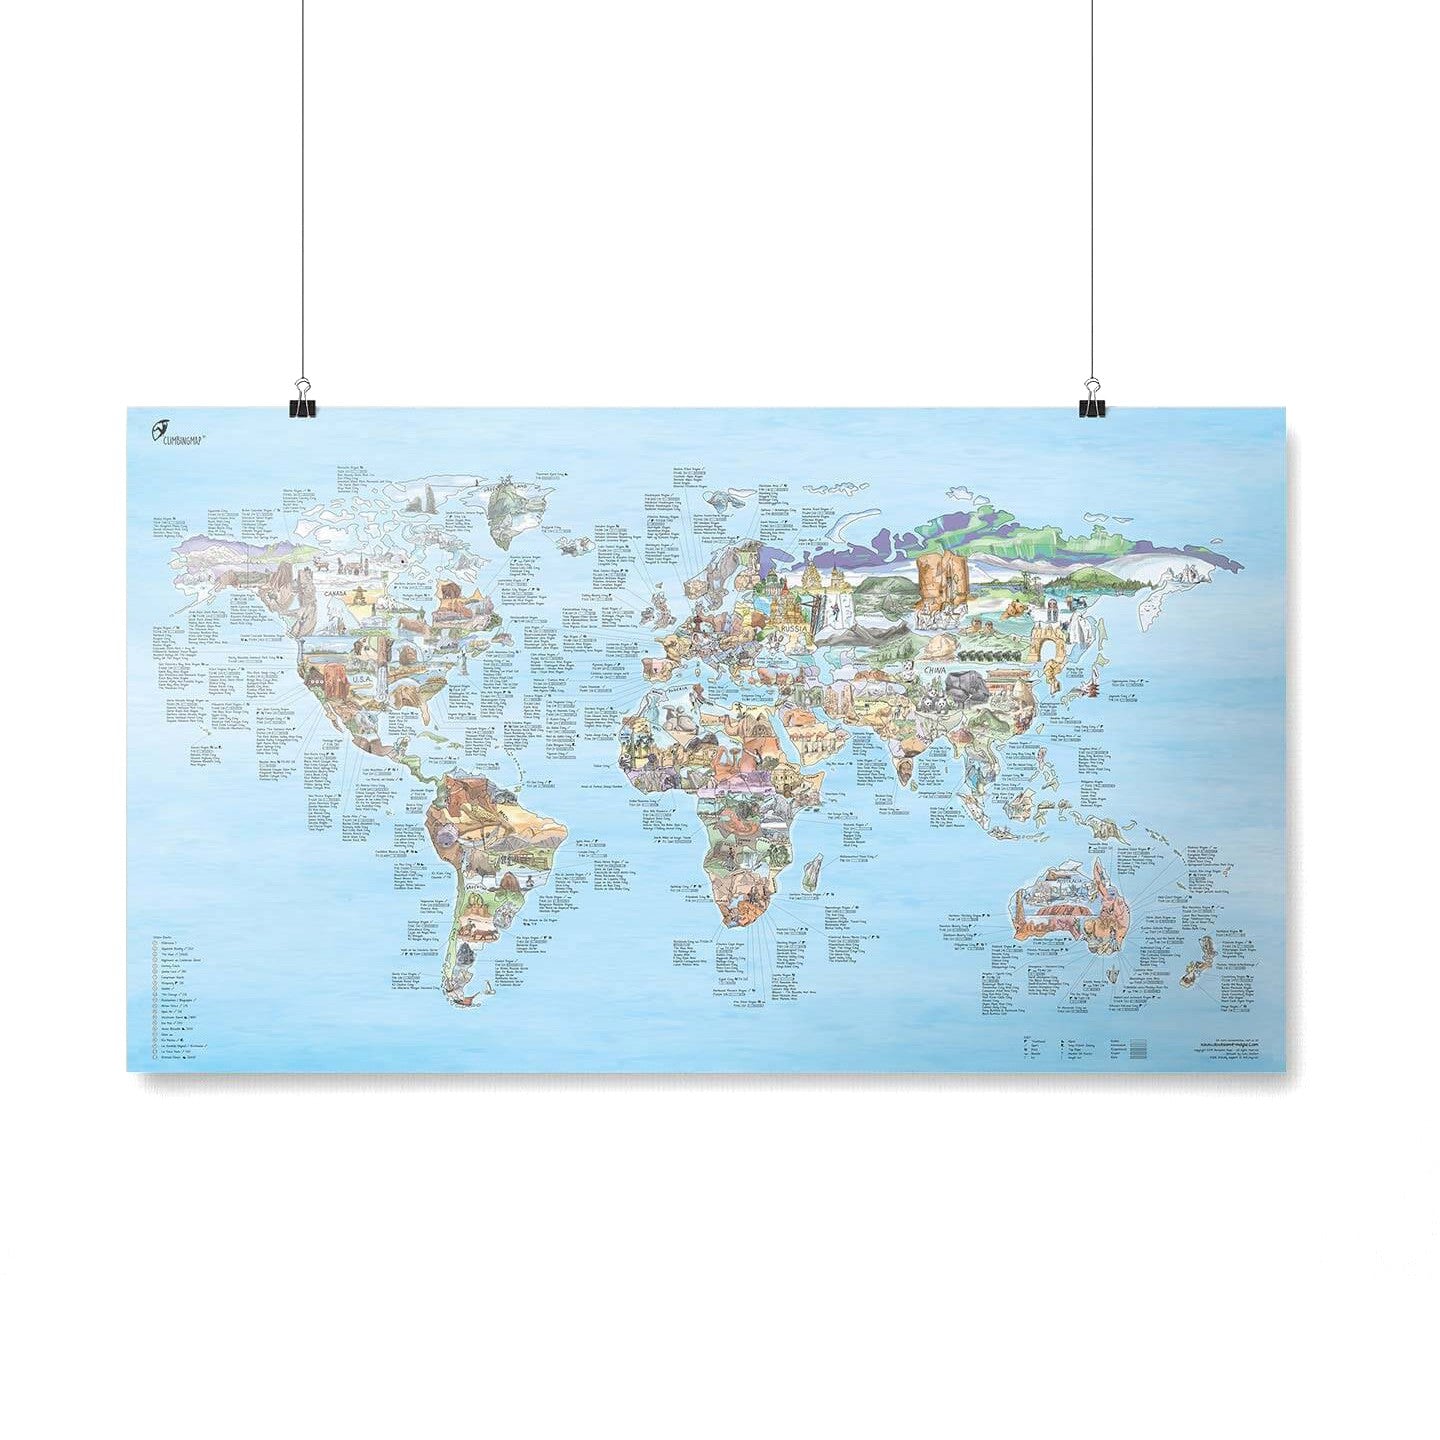 Awesome Maps - World Map Poster Climbing Map Re-writable